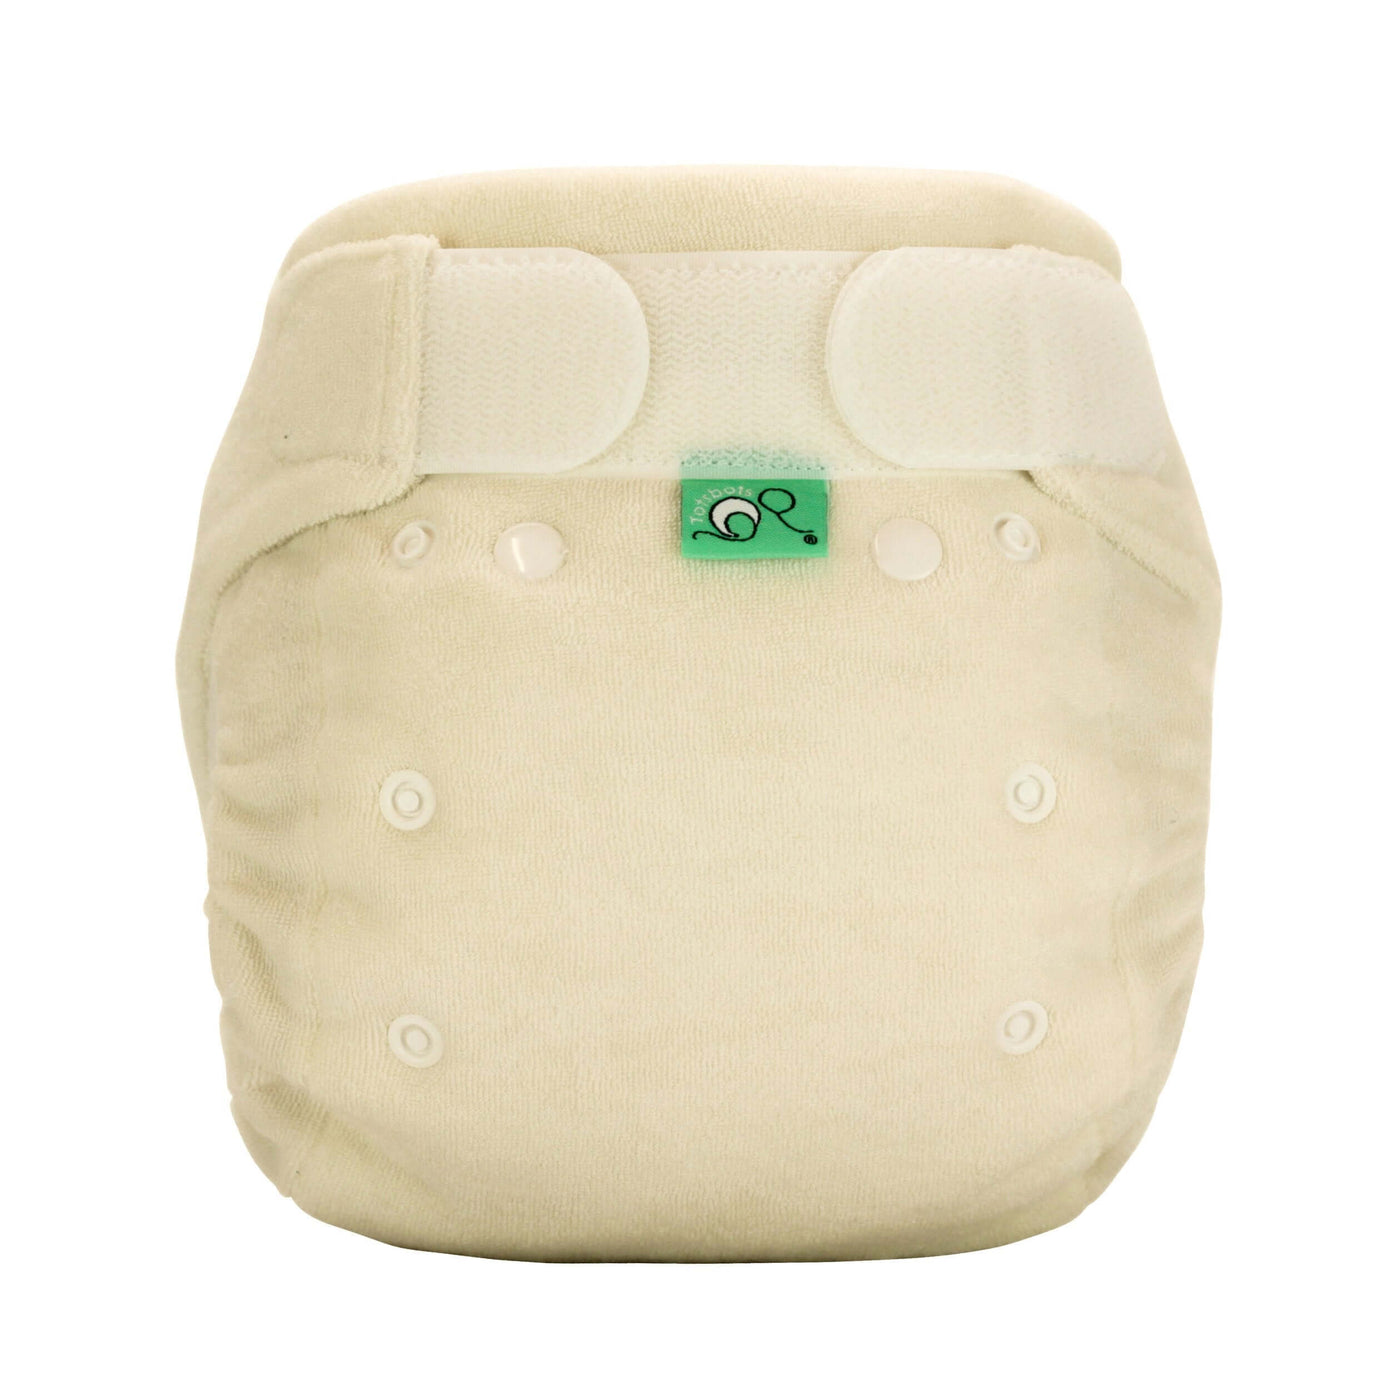 Tots Bots Bamboozle Stretch Nappy Colour: Natural Size: Size 1 (6-18lbs) reusable nappies Earthlets